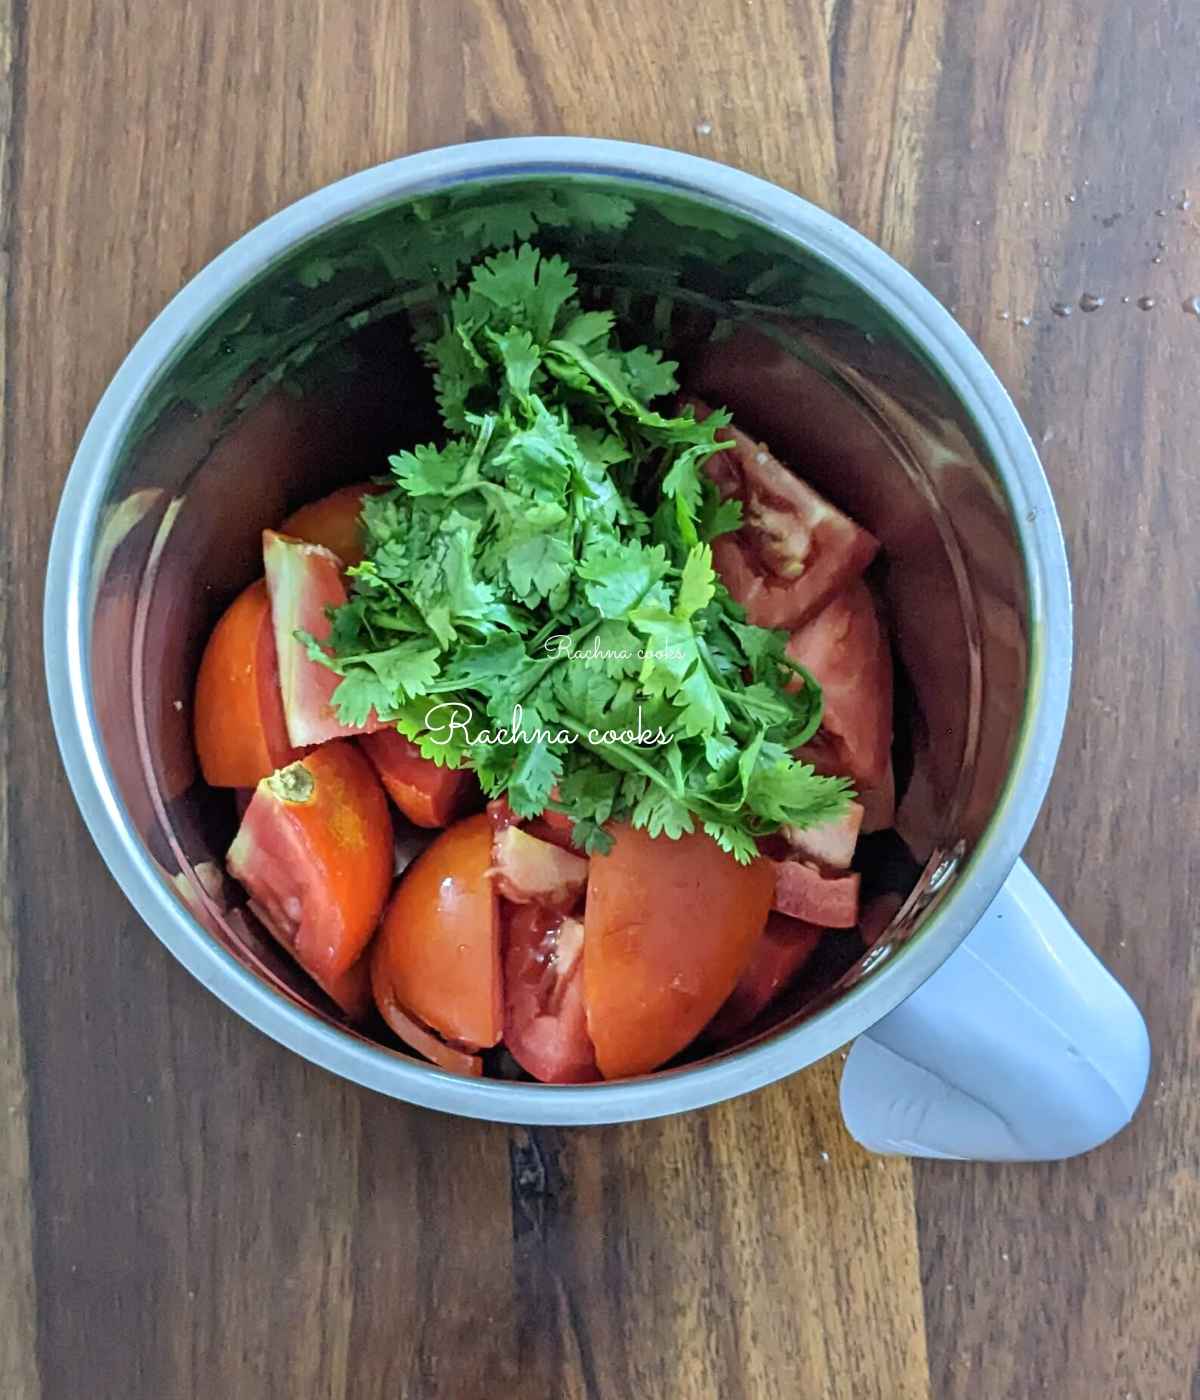 Chopped tomato, green chillies, ginger, garlic and cilantro in a blender jar